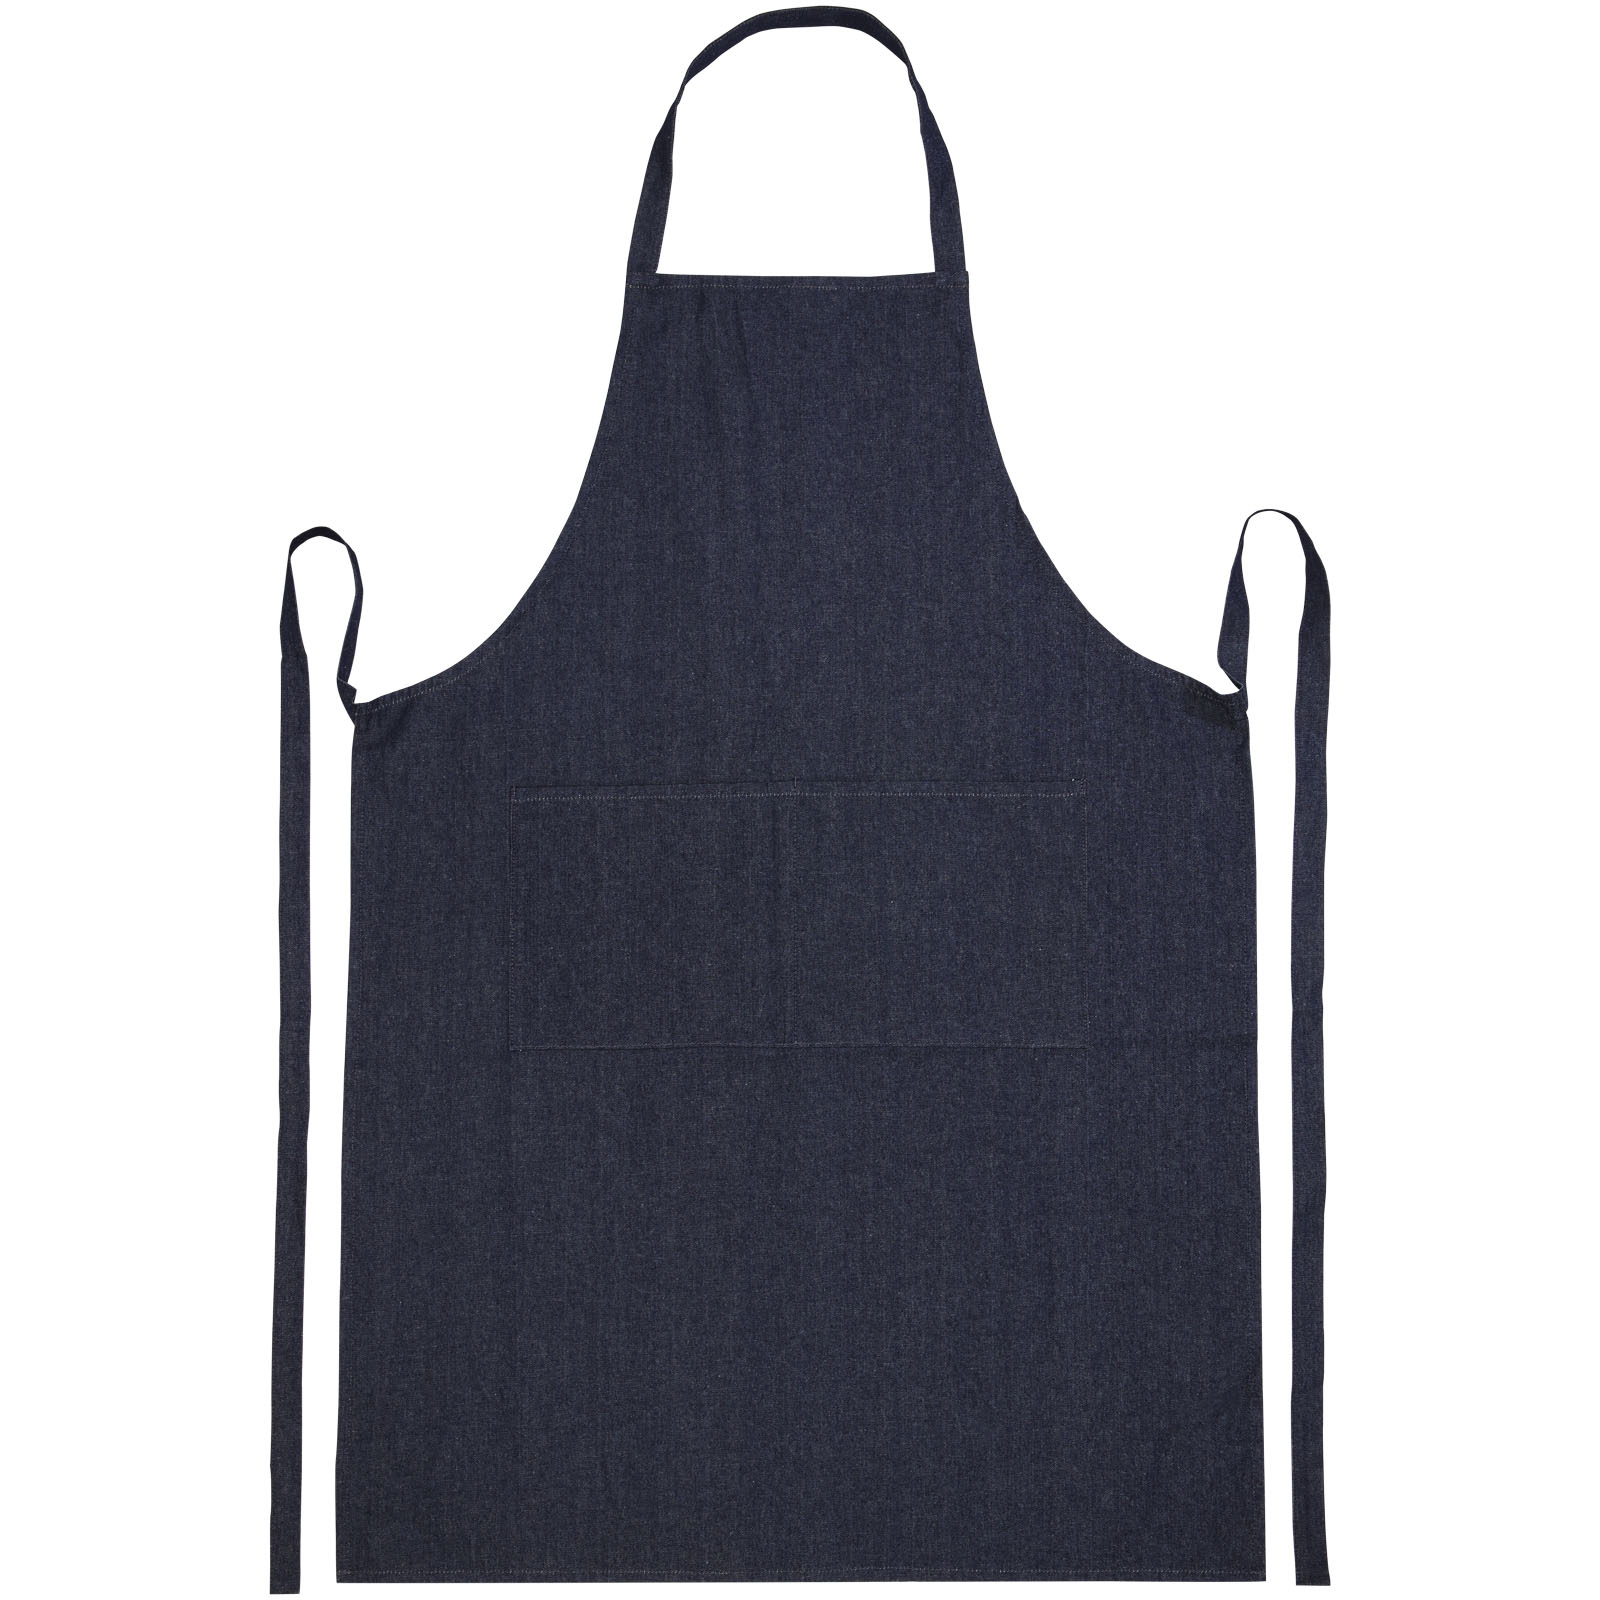 Advertising Aprons - Jeen 200 g/m² recycled denim apron - 1